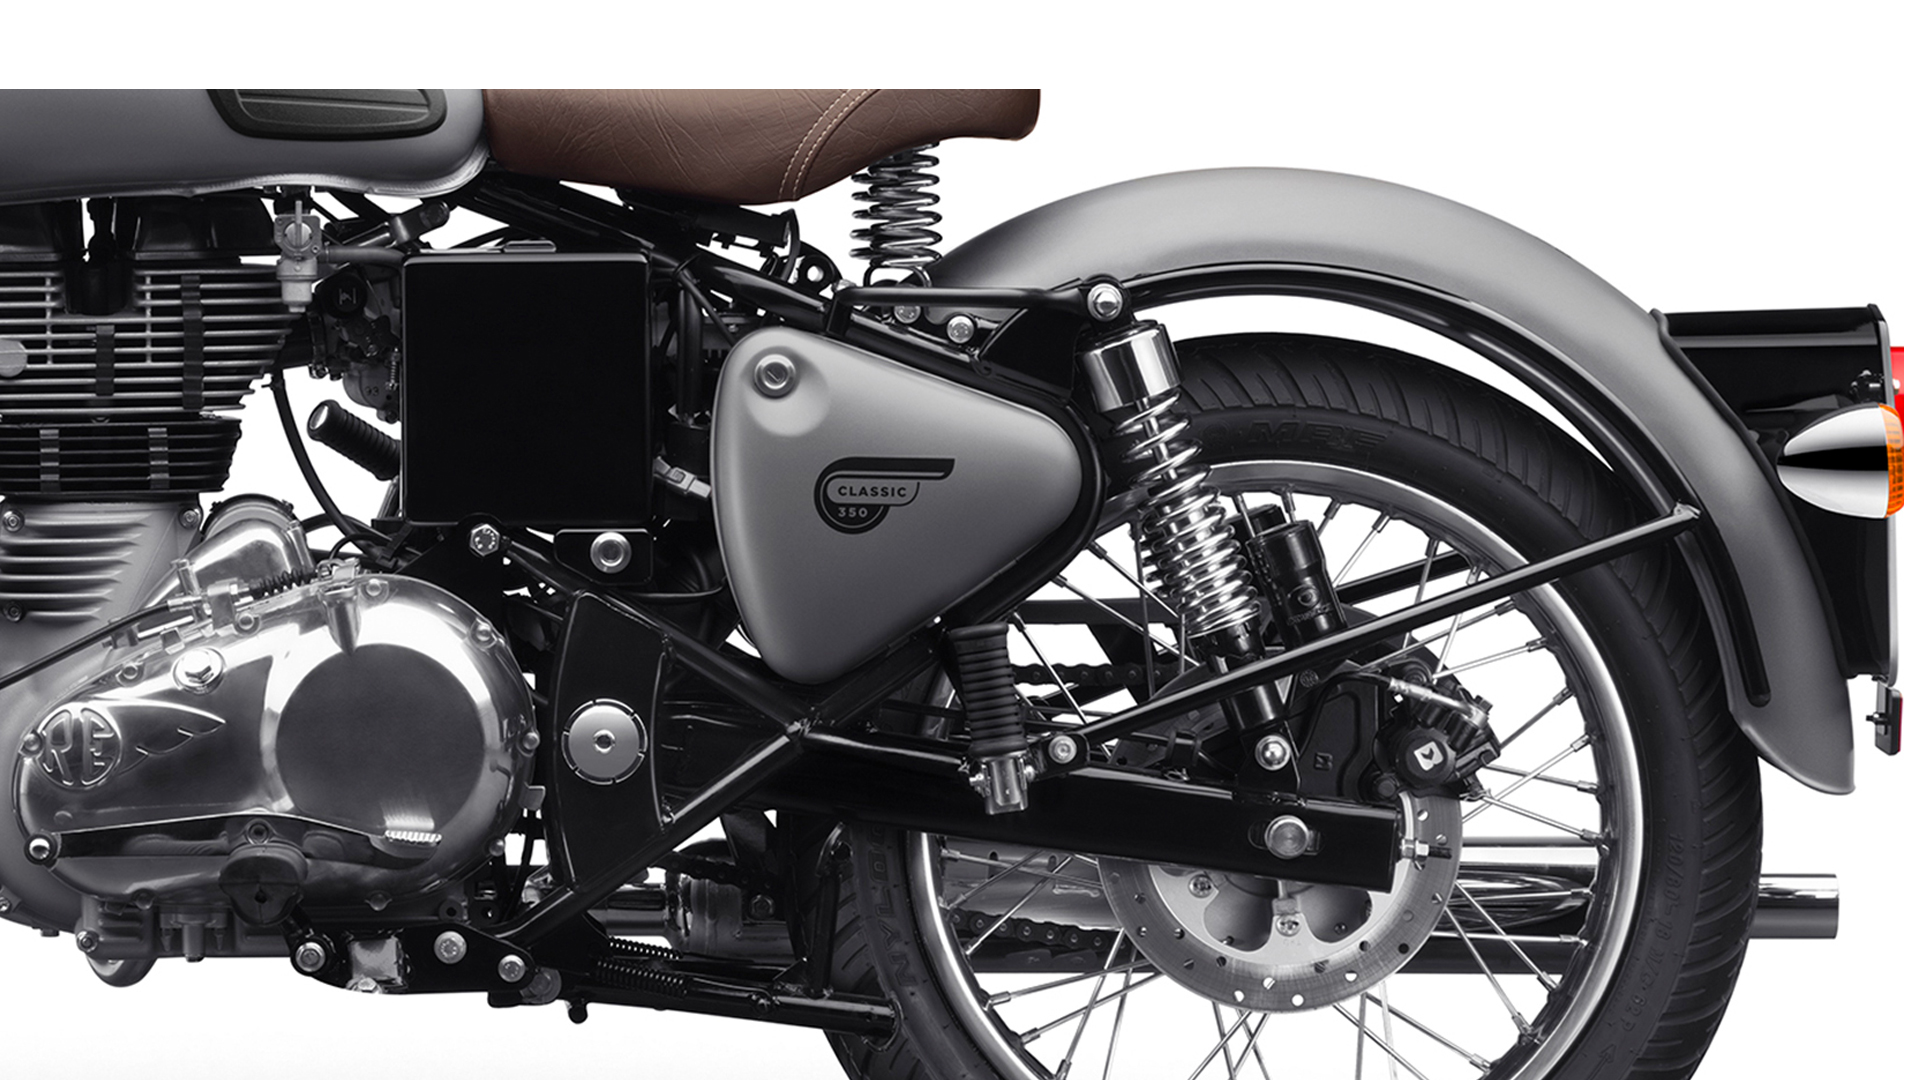 Royal Enfield Classic 350 2020 Gunmetal - Price in India, Mileage, Reviews,  Colours, Specification, Images - Overdrive